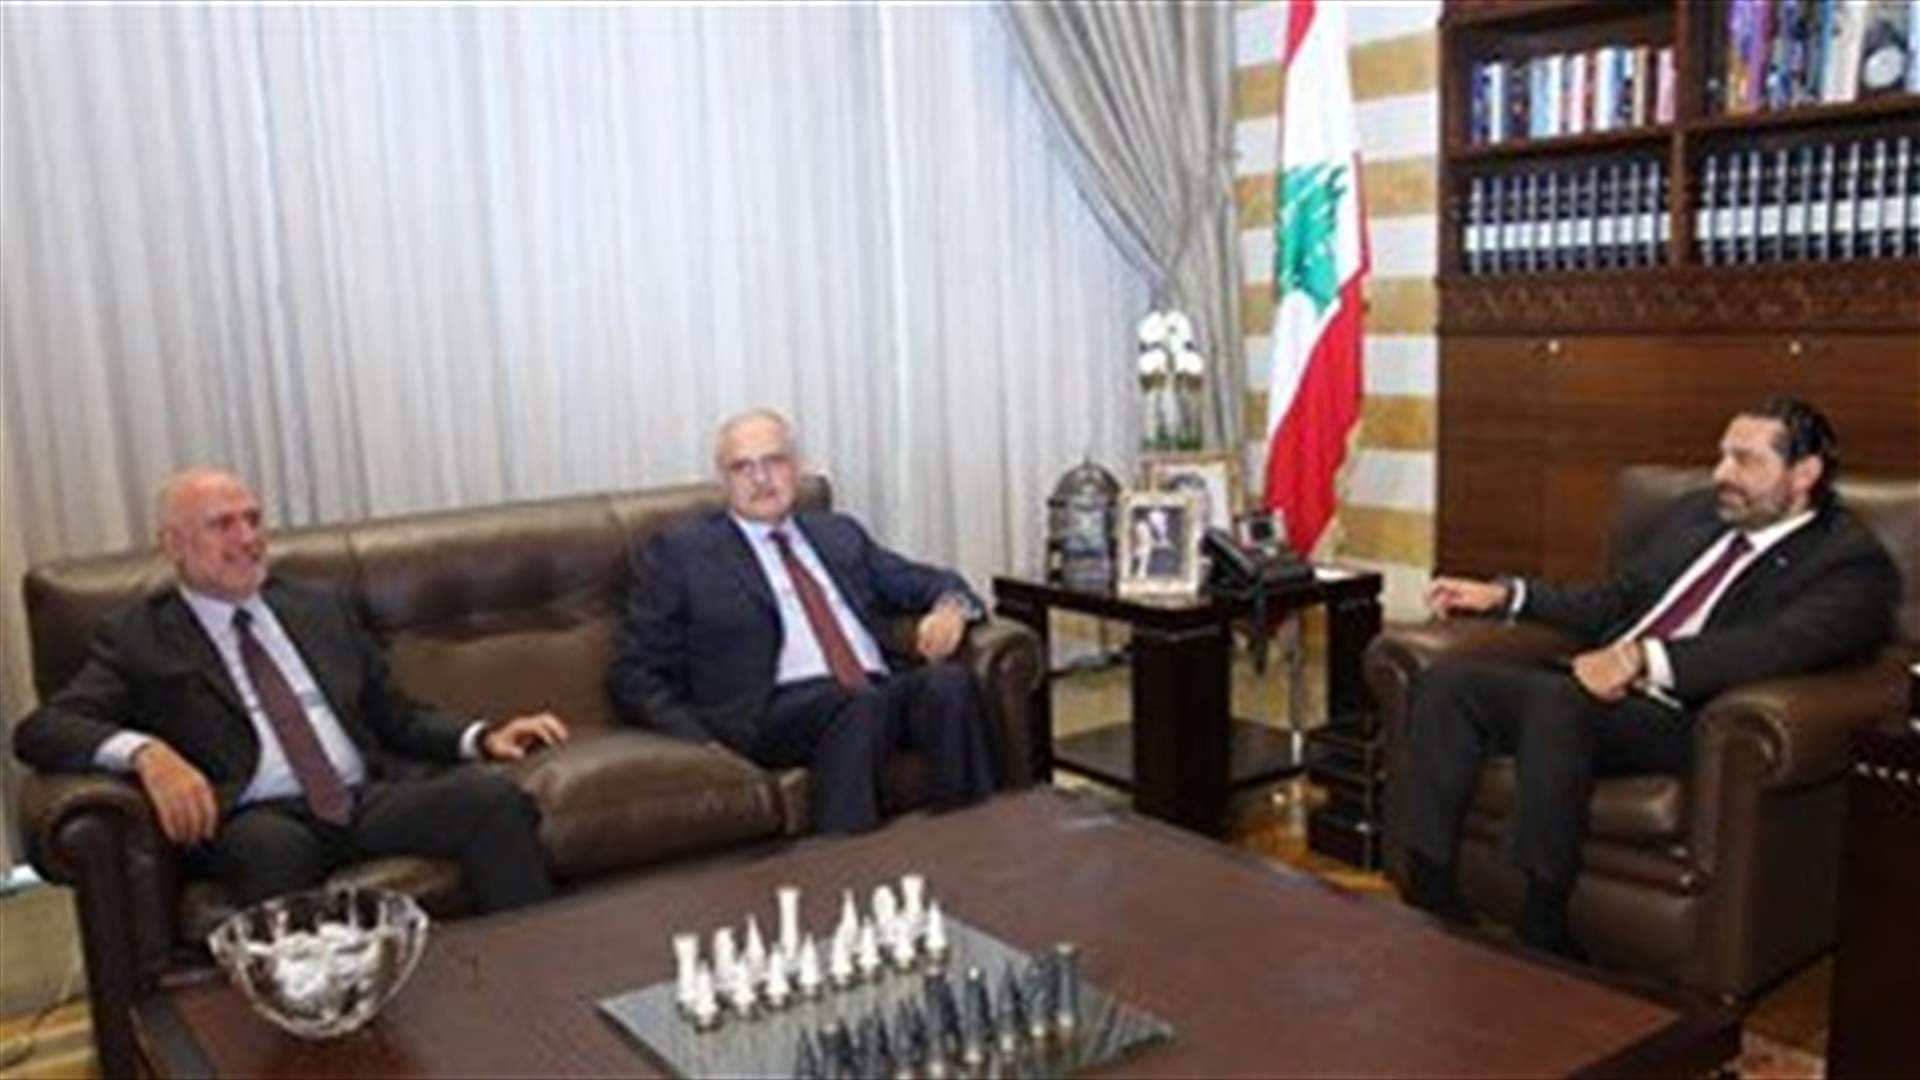 Cabinet formation focus of Khalil, Fenianos meeting with Hariri